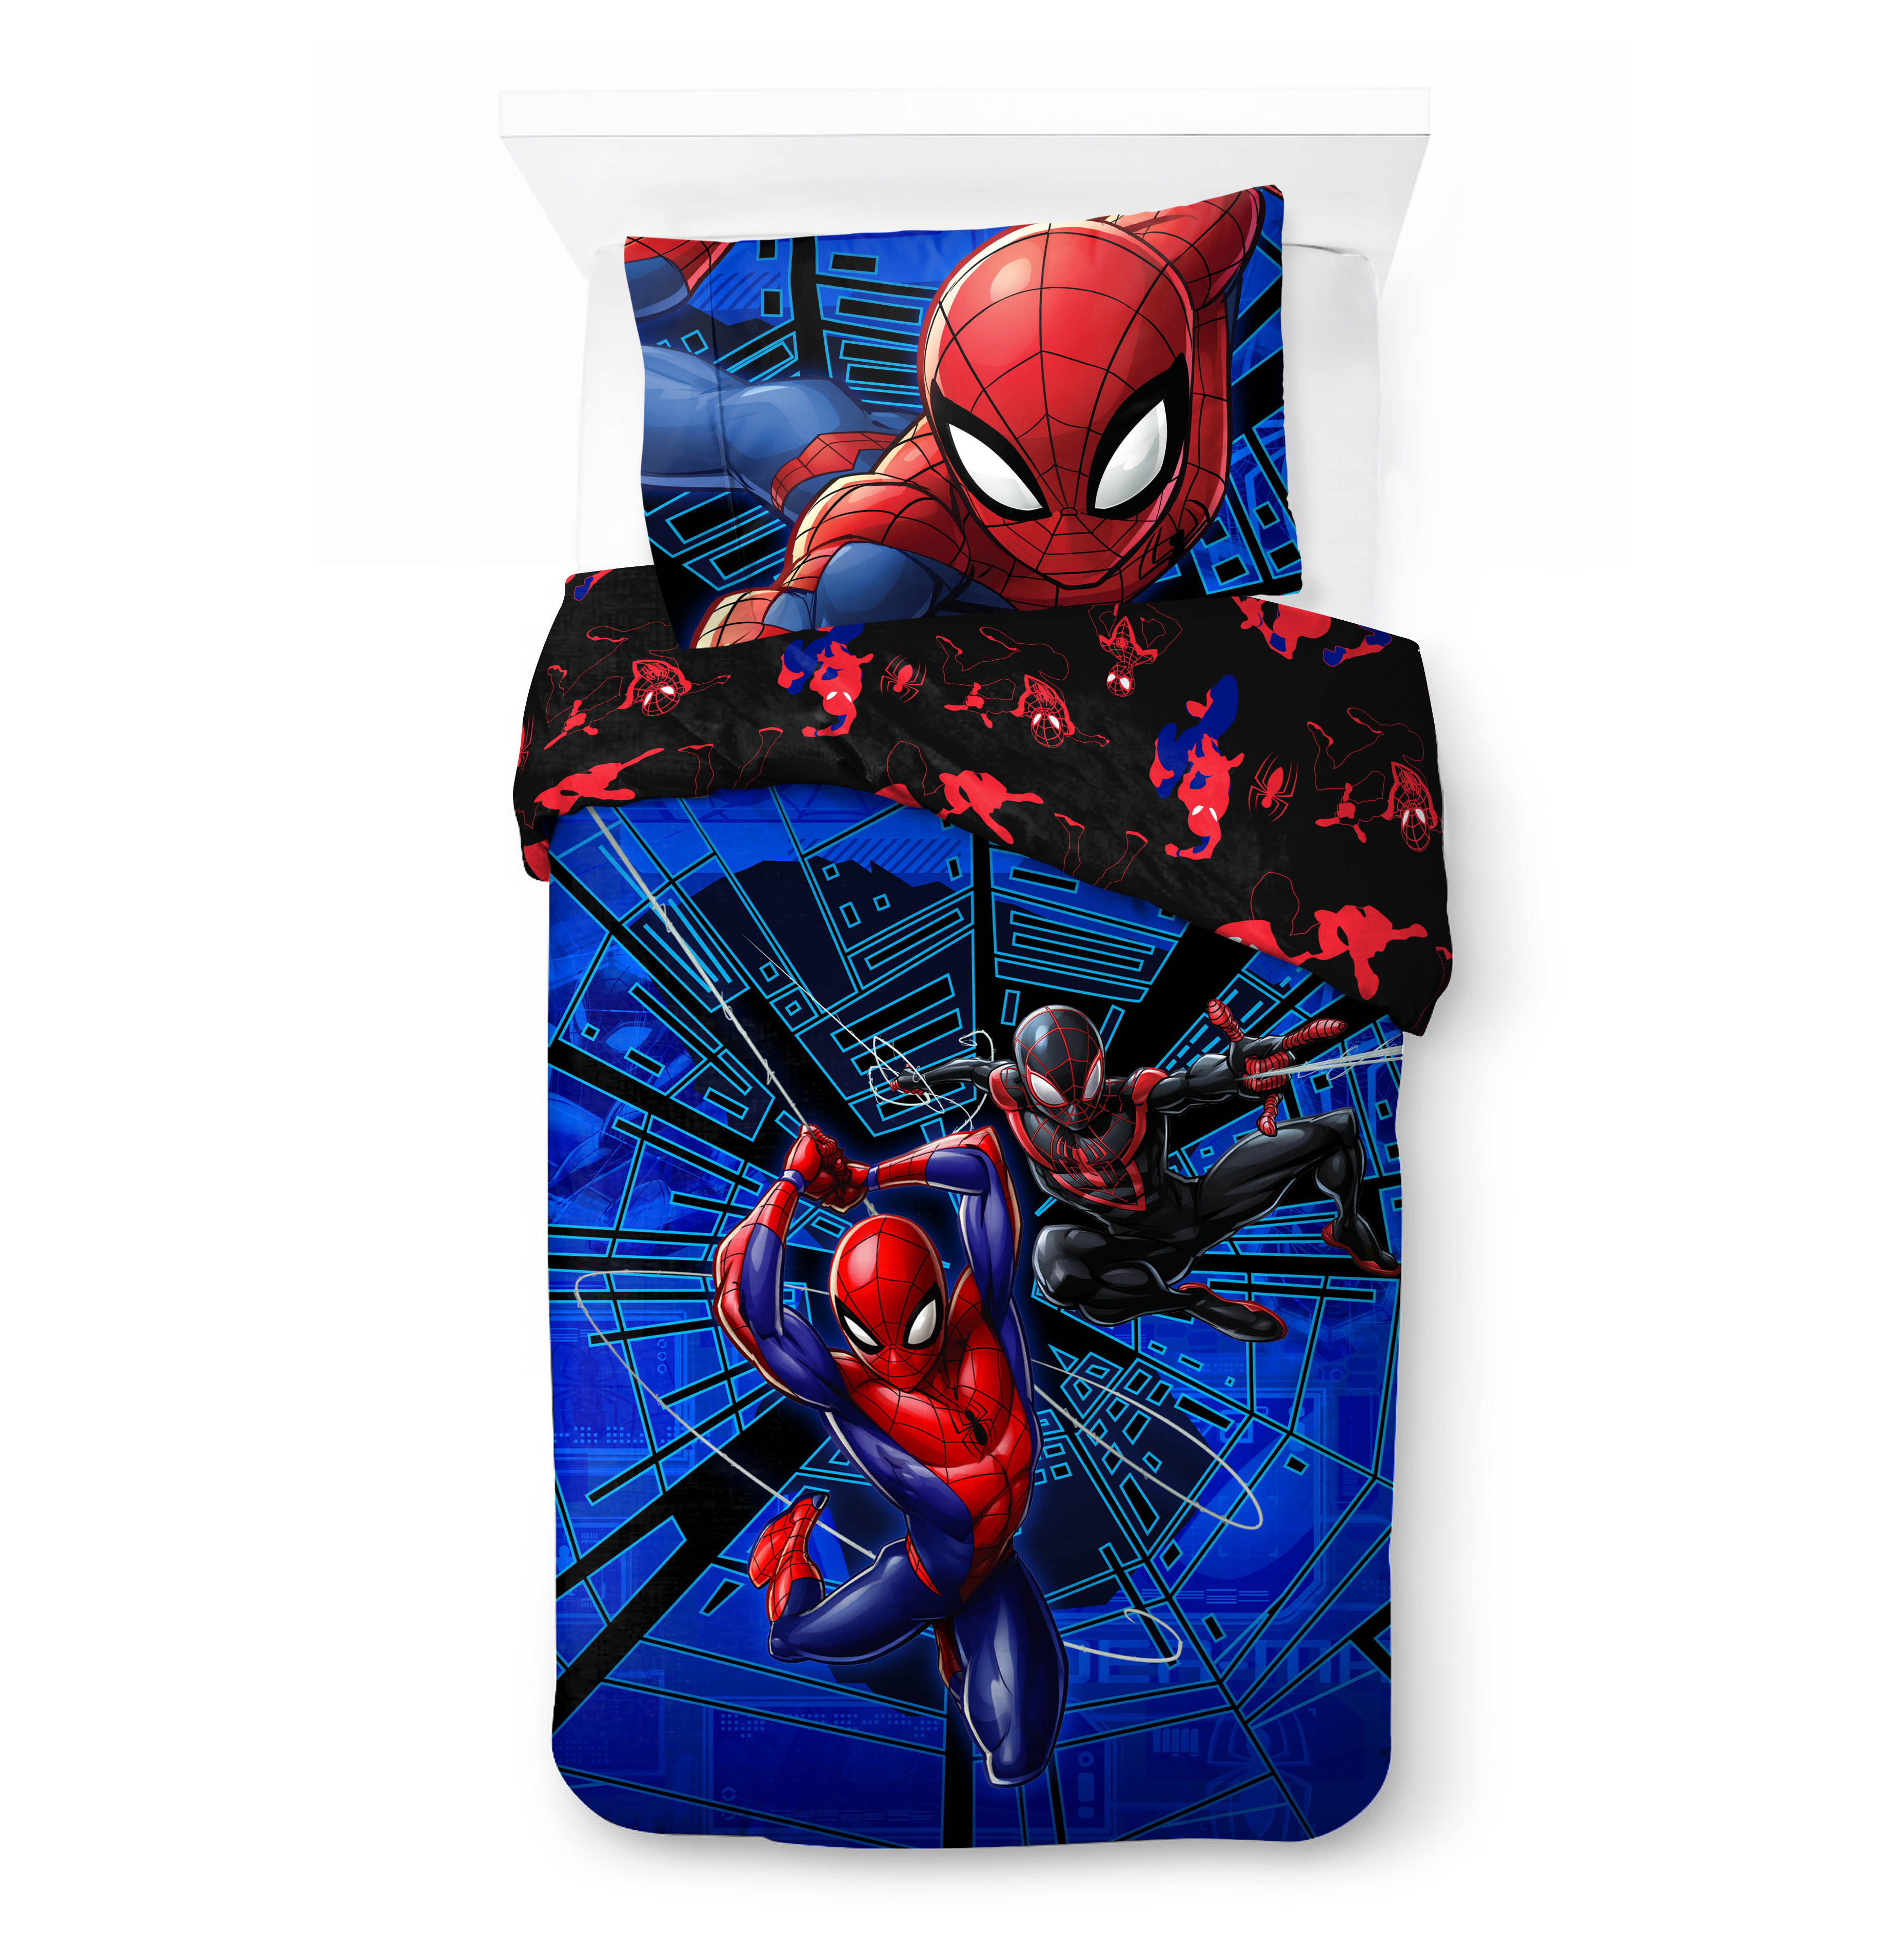 Spider-Man Kids 2-Piece Twin/Full Reversible Comforter and Pillowcase Bedding Set, Microfiber, Blue, Marvel - image 1 of 11